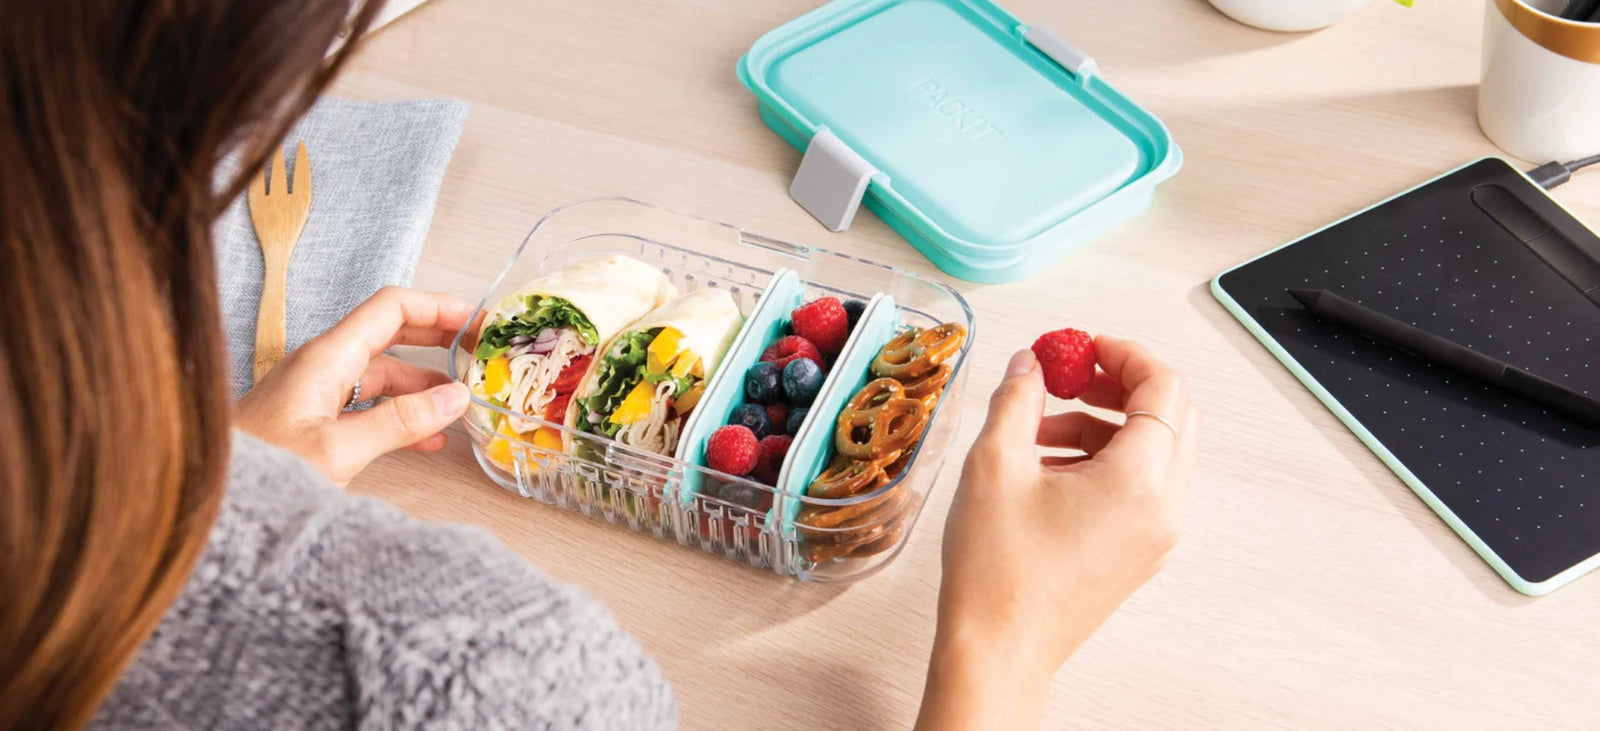 Lunch Box Plastic Tupperware sleek lunches, For Office, 2 Lunch Boxes